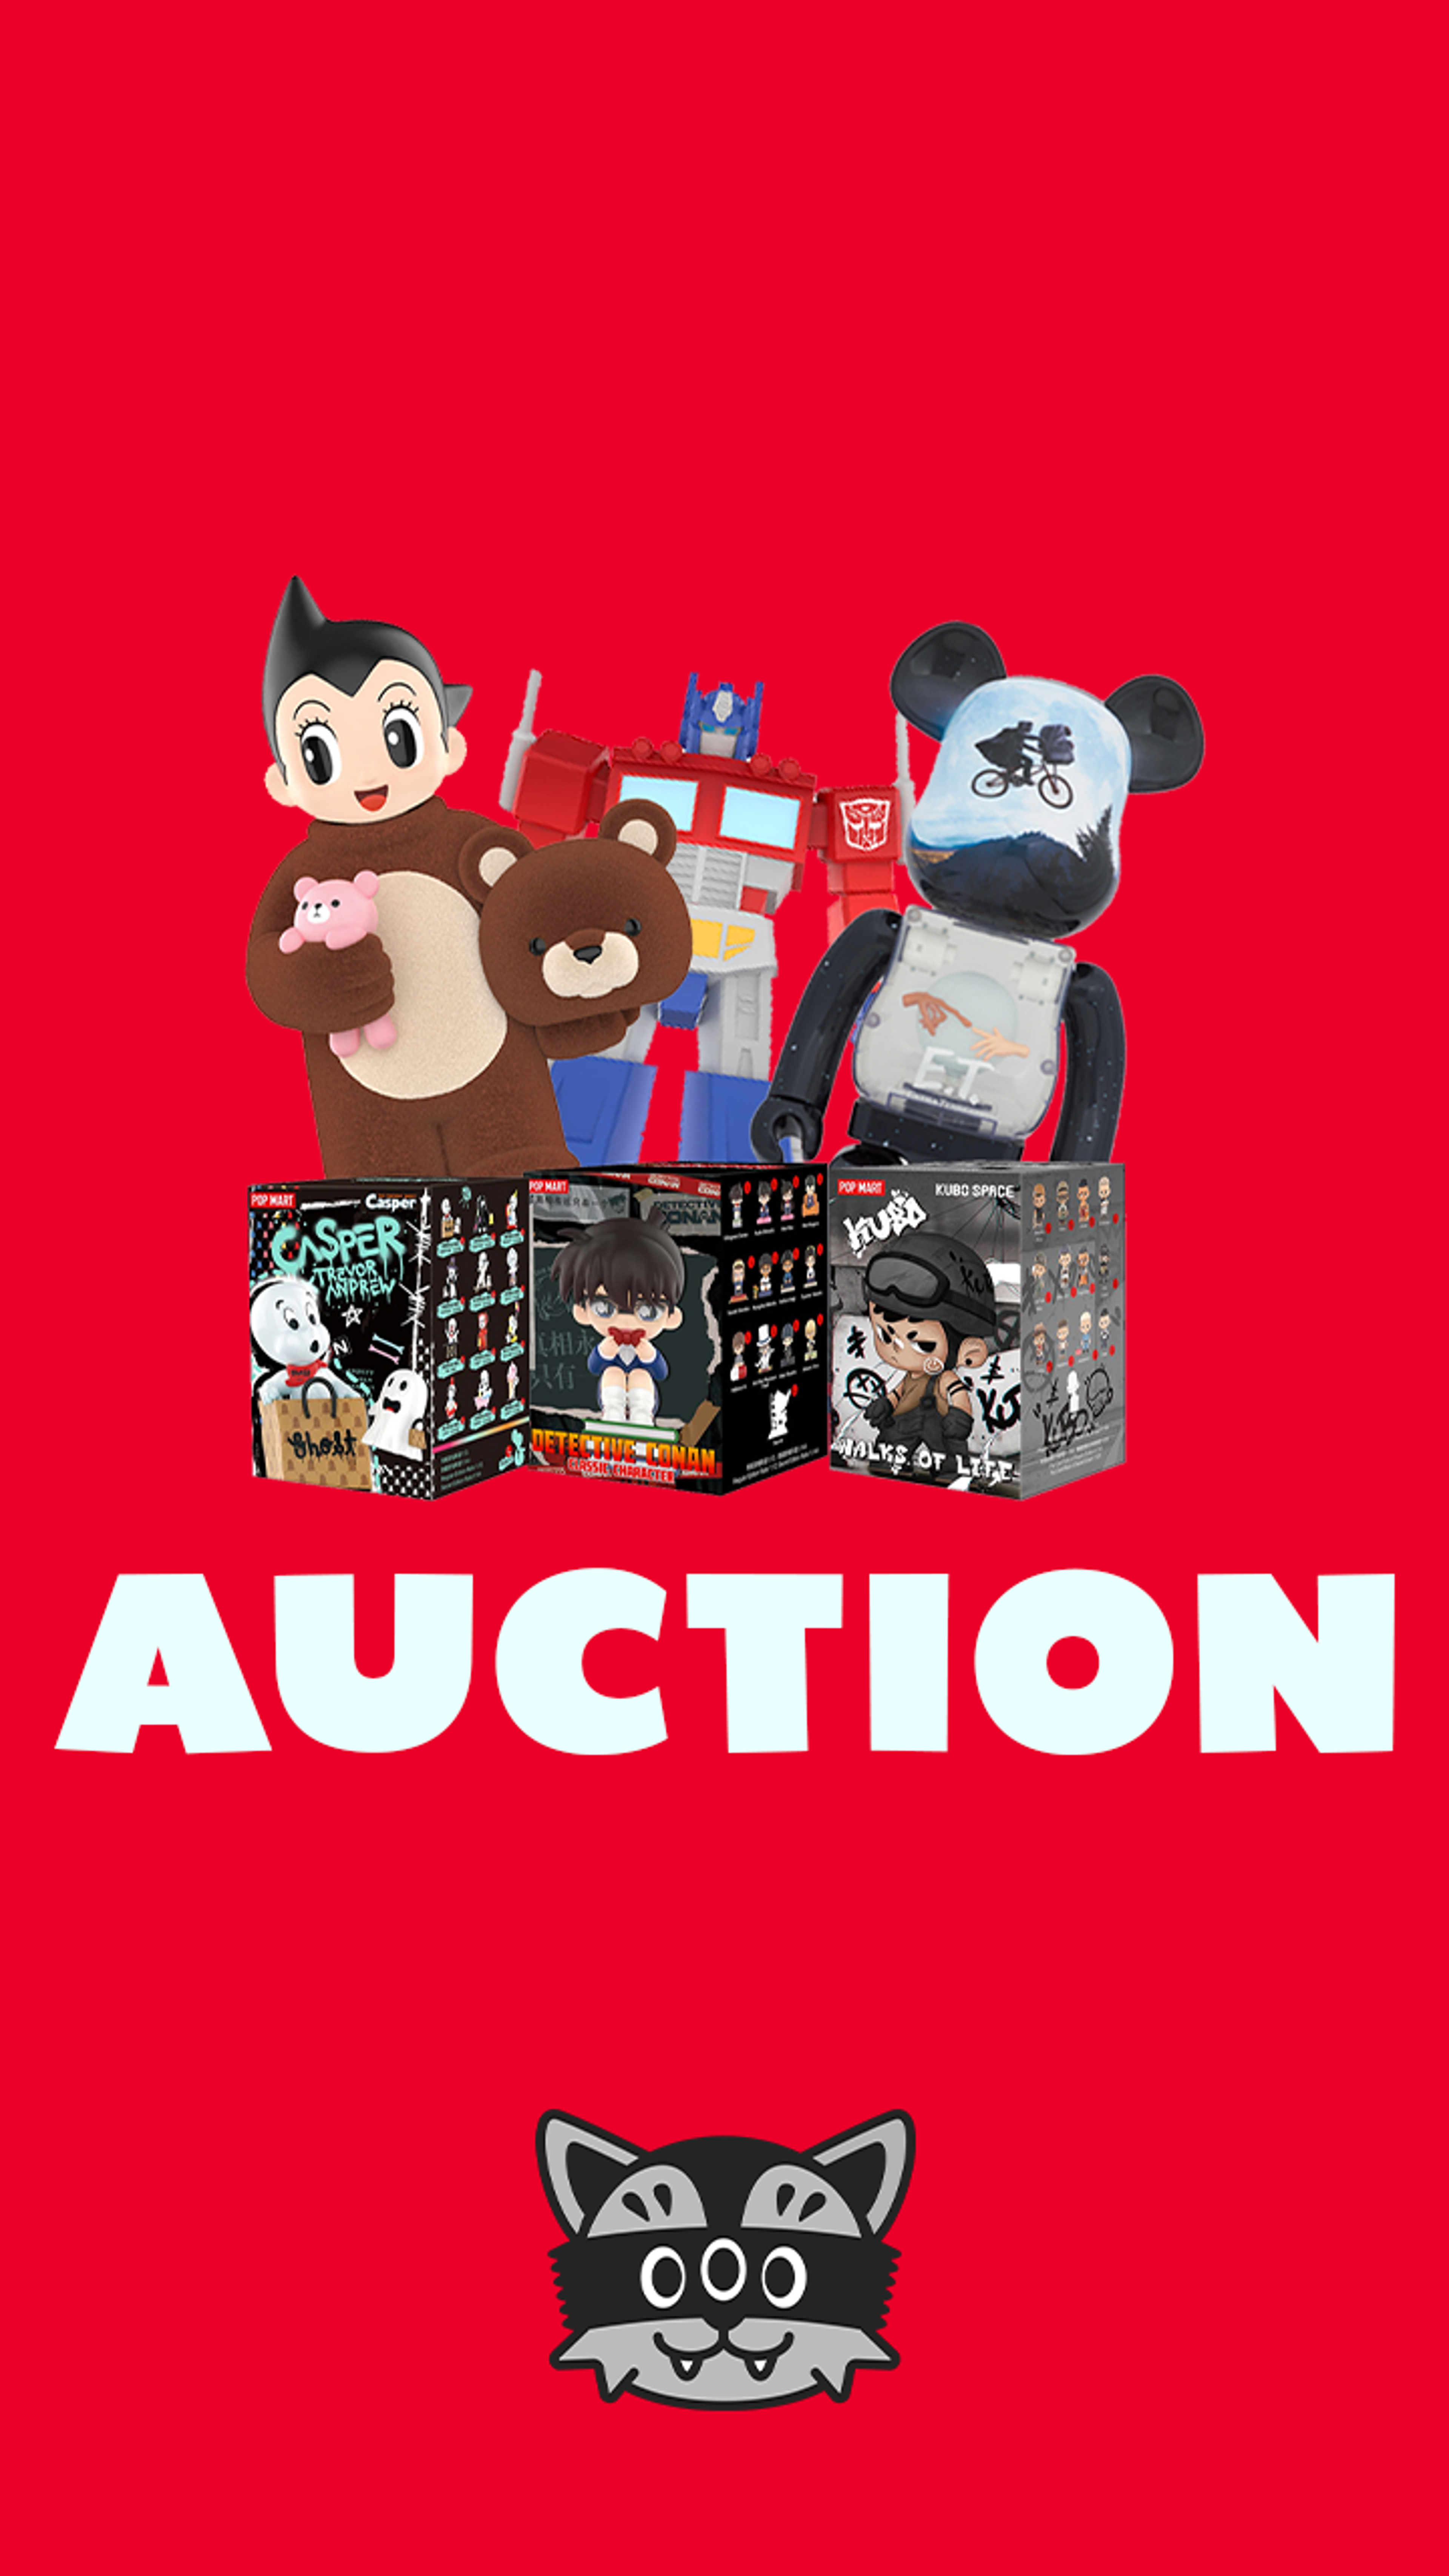 Preview image for the show titled "Mindzai Auction - April 25" at Today @ 5:00 PM